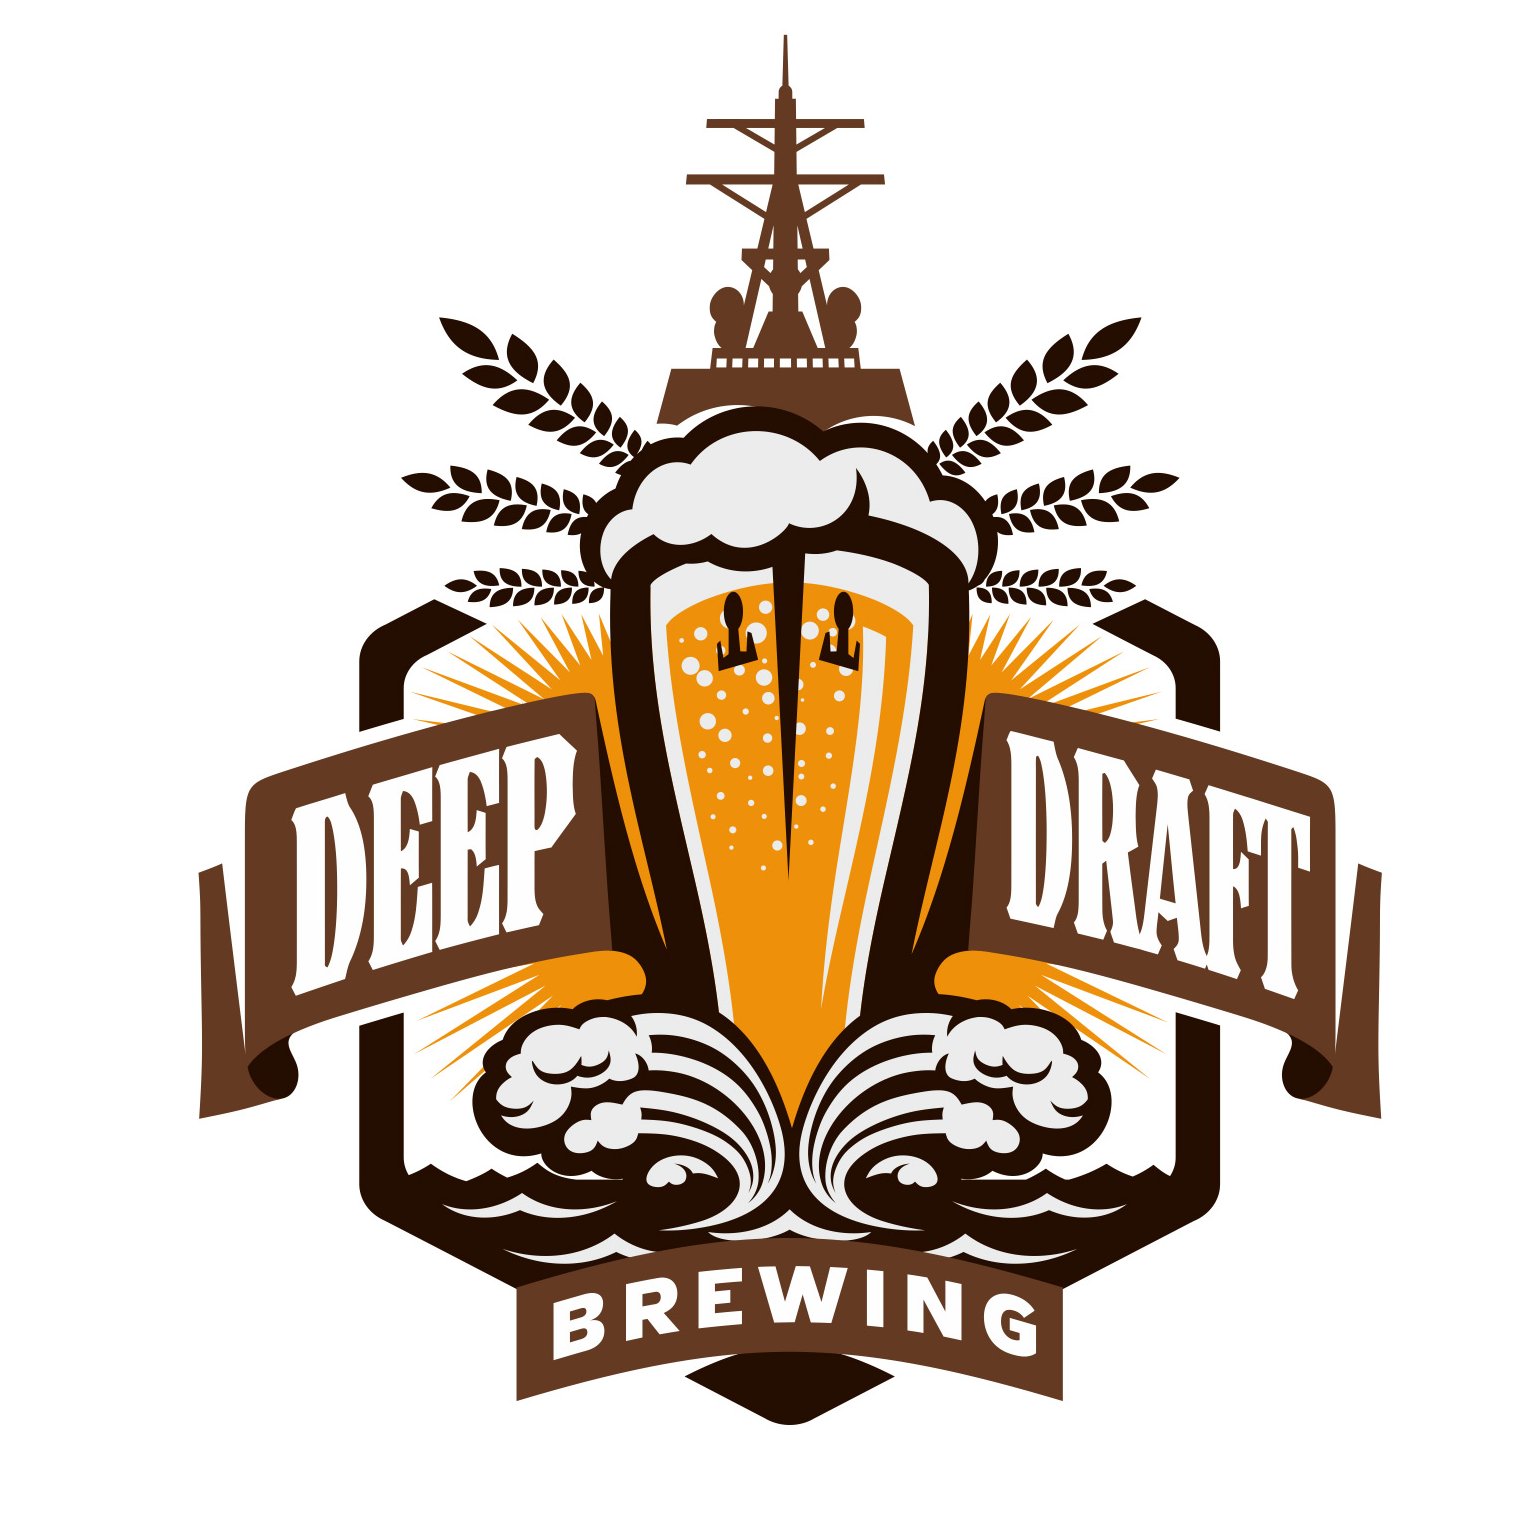 Nano brewery devoted to brewing the finest German-style craft beers and to the nautical heritage of Puget Sound.  Live Life. Drink Deep.